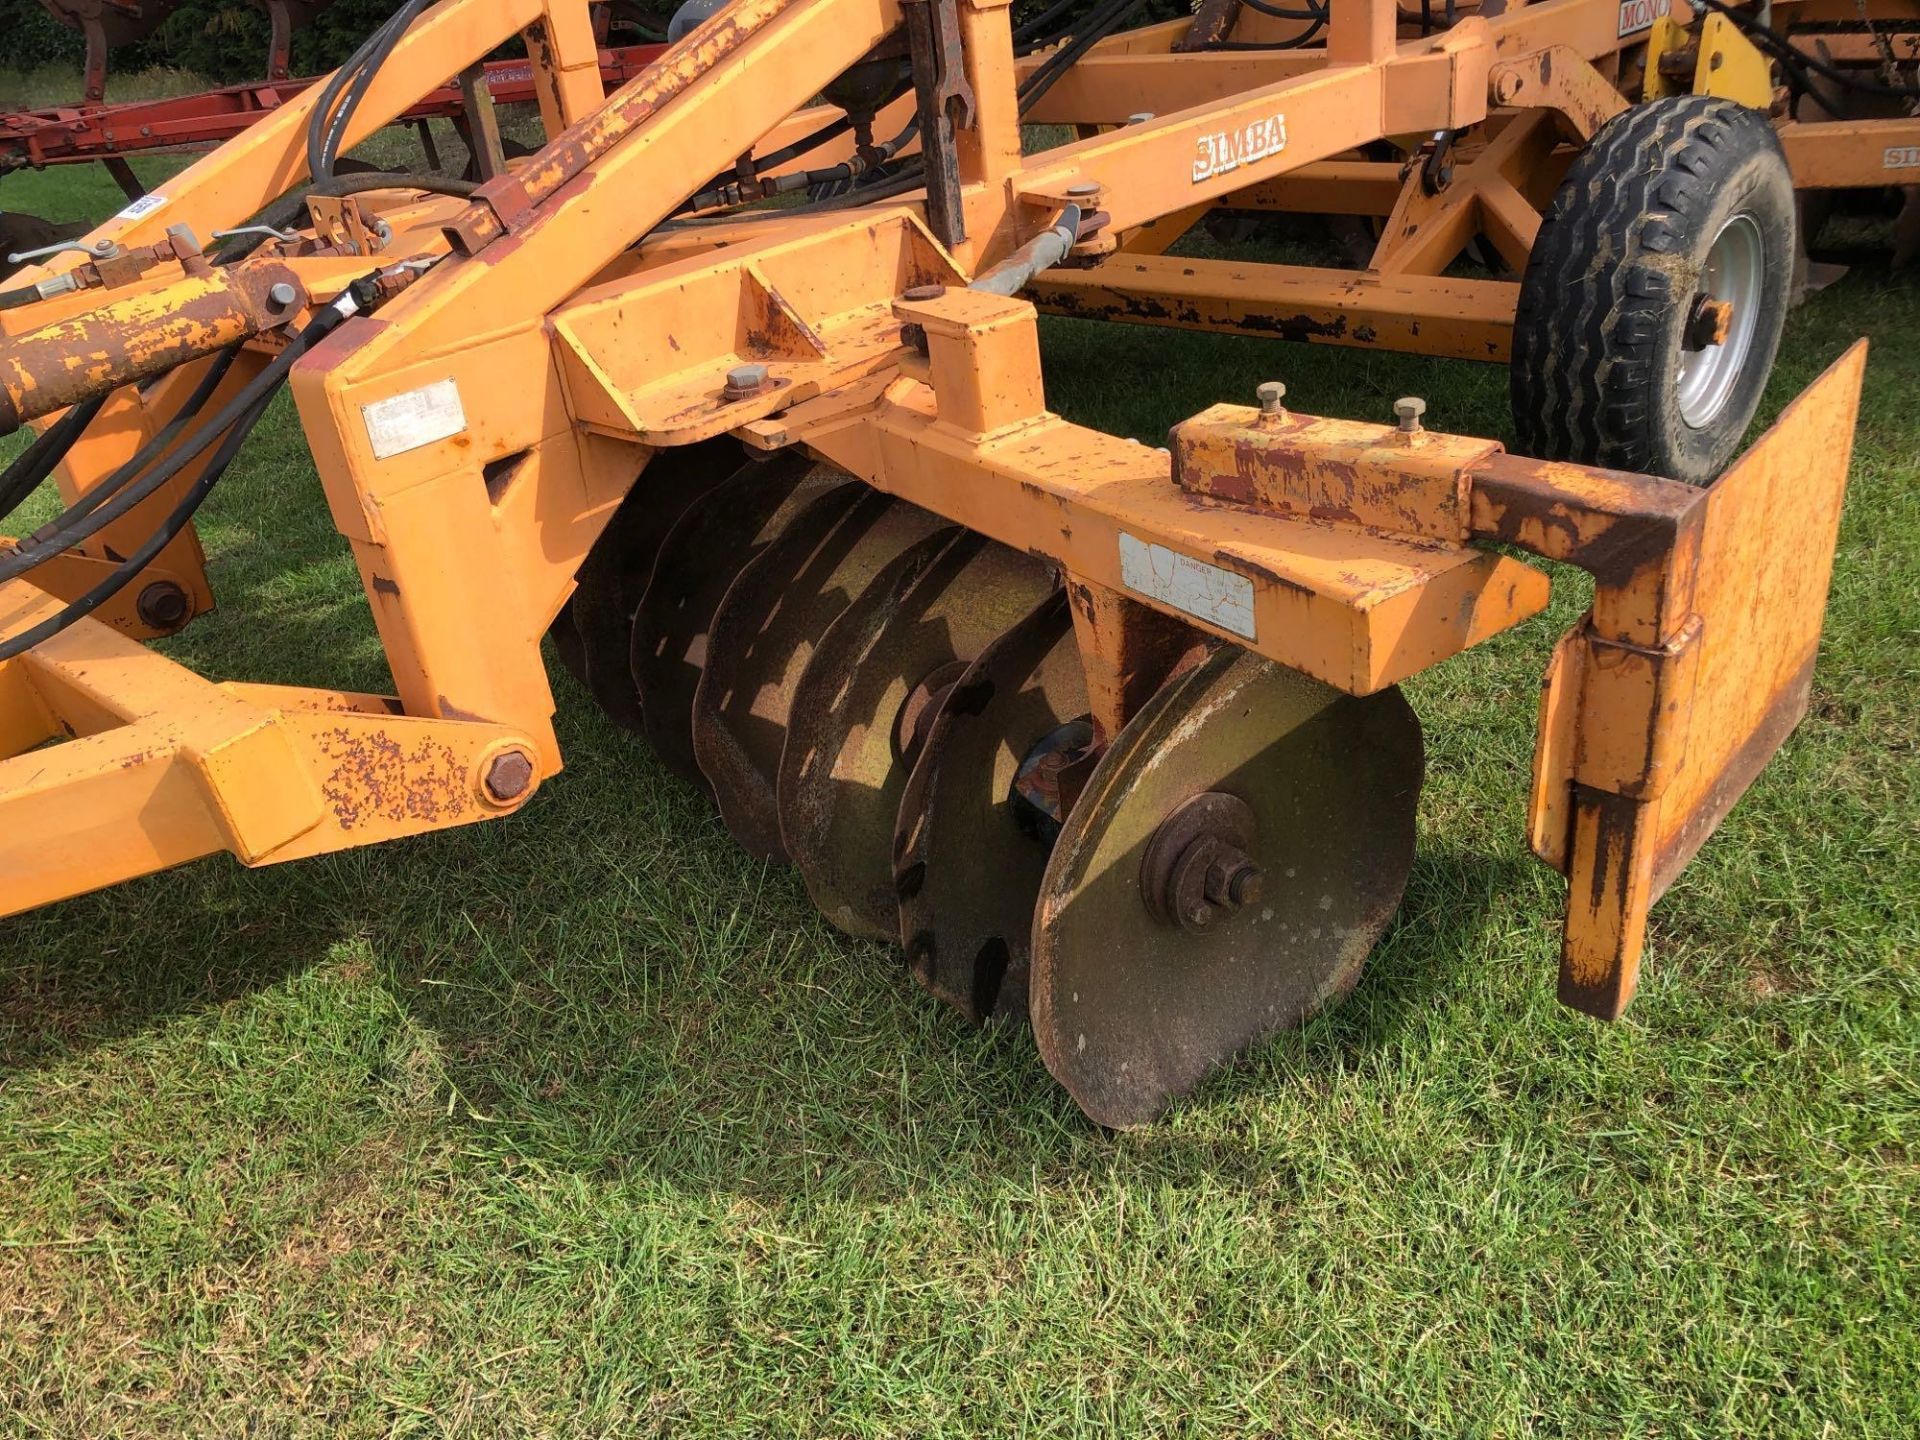 1996 Simba Mono trailed cultivator with front discs, 5 auto-reset subsoiler legs, rear discs and too - Image 3 of 12